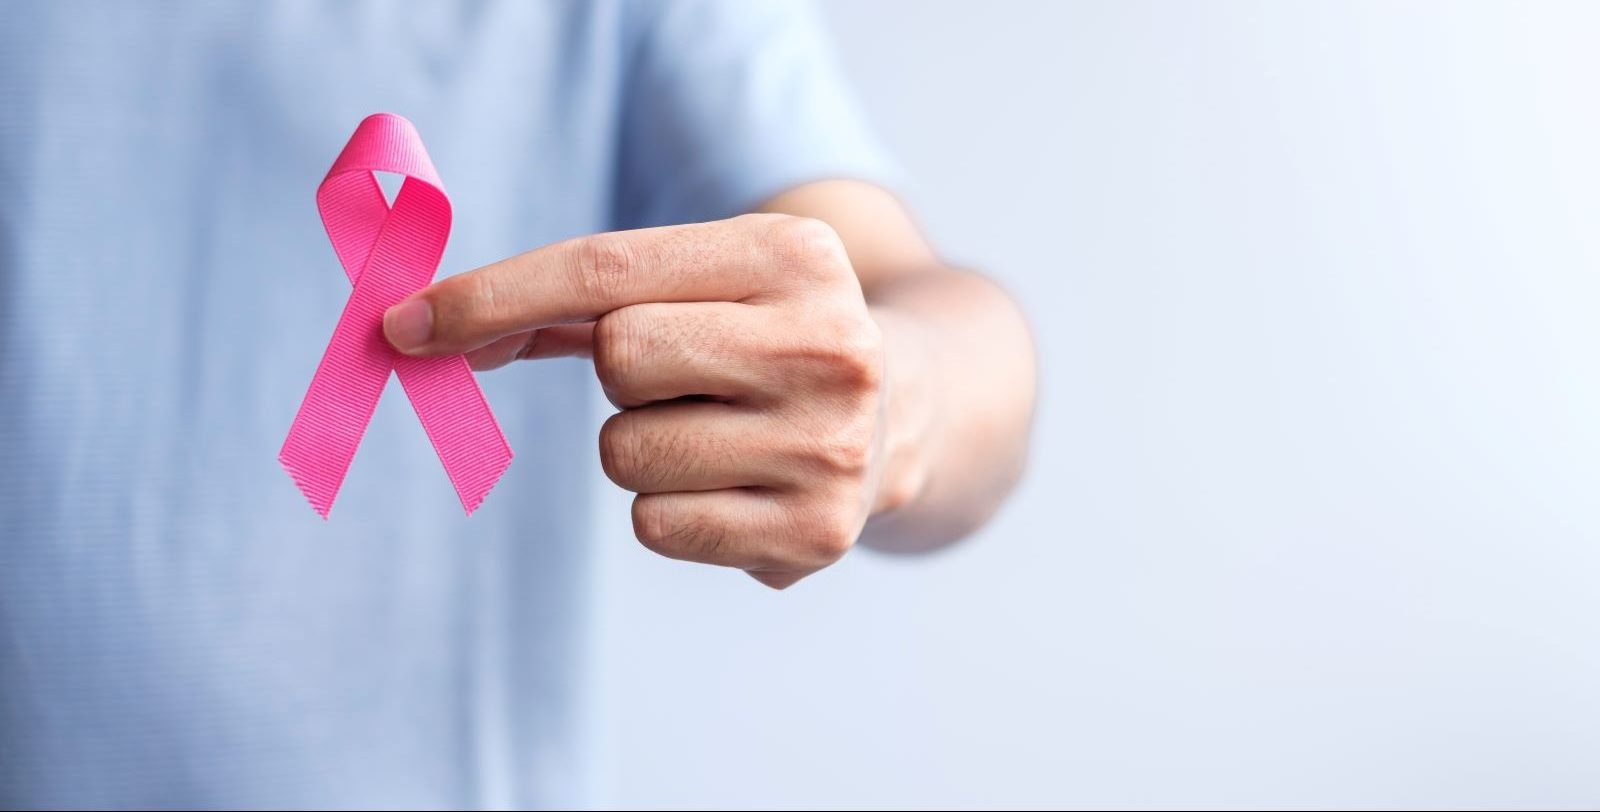 Although it is rare, male breast cancer is diagnosed in 2700 men each year, and claims the lives of around 530 men annually.